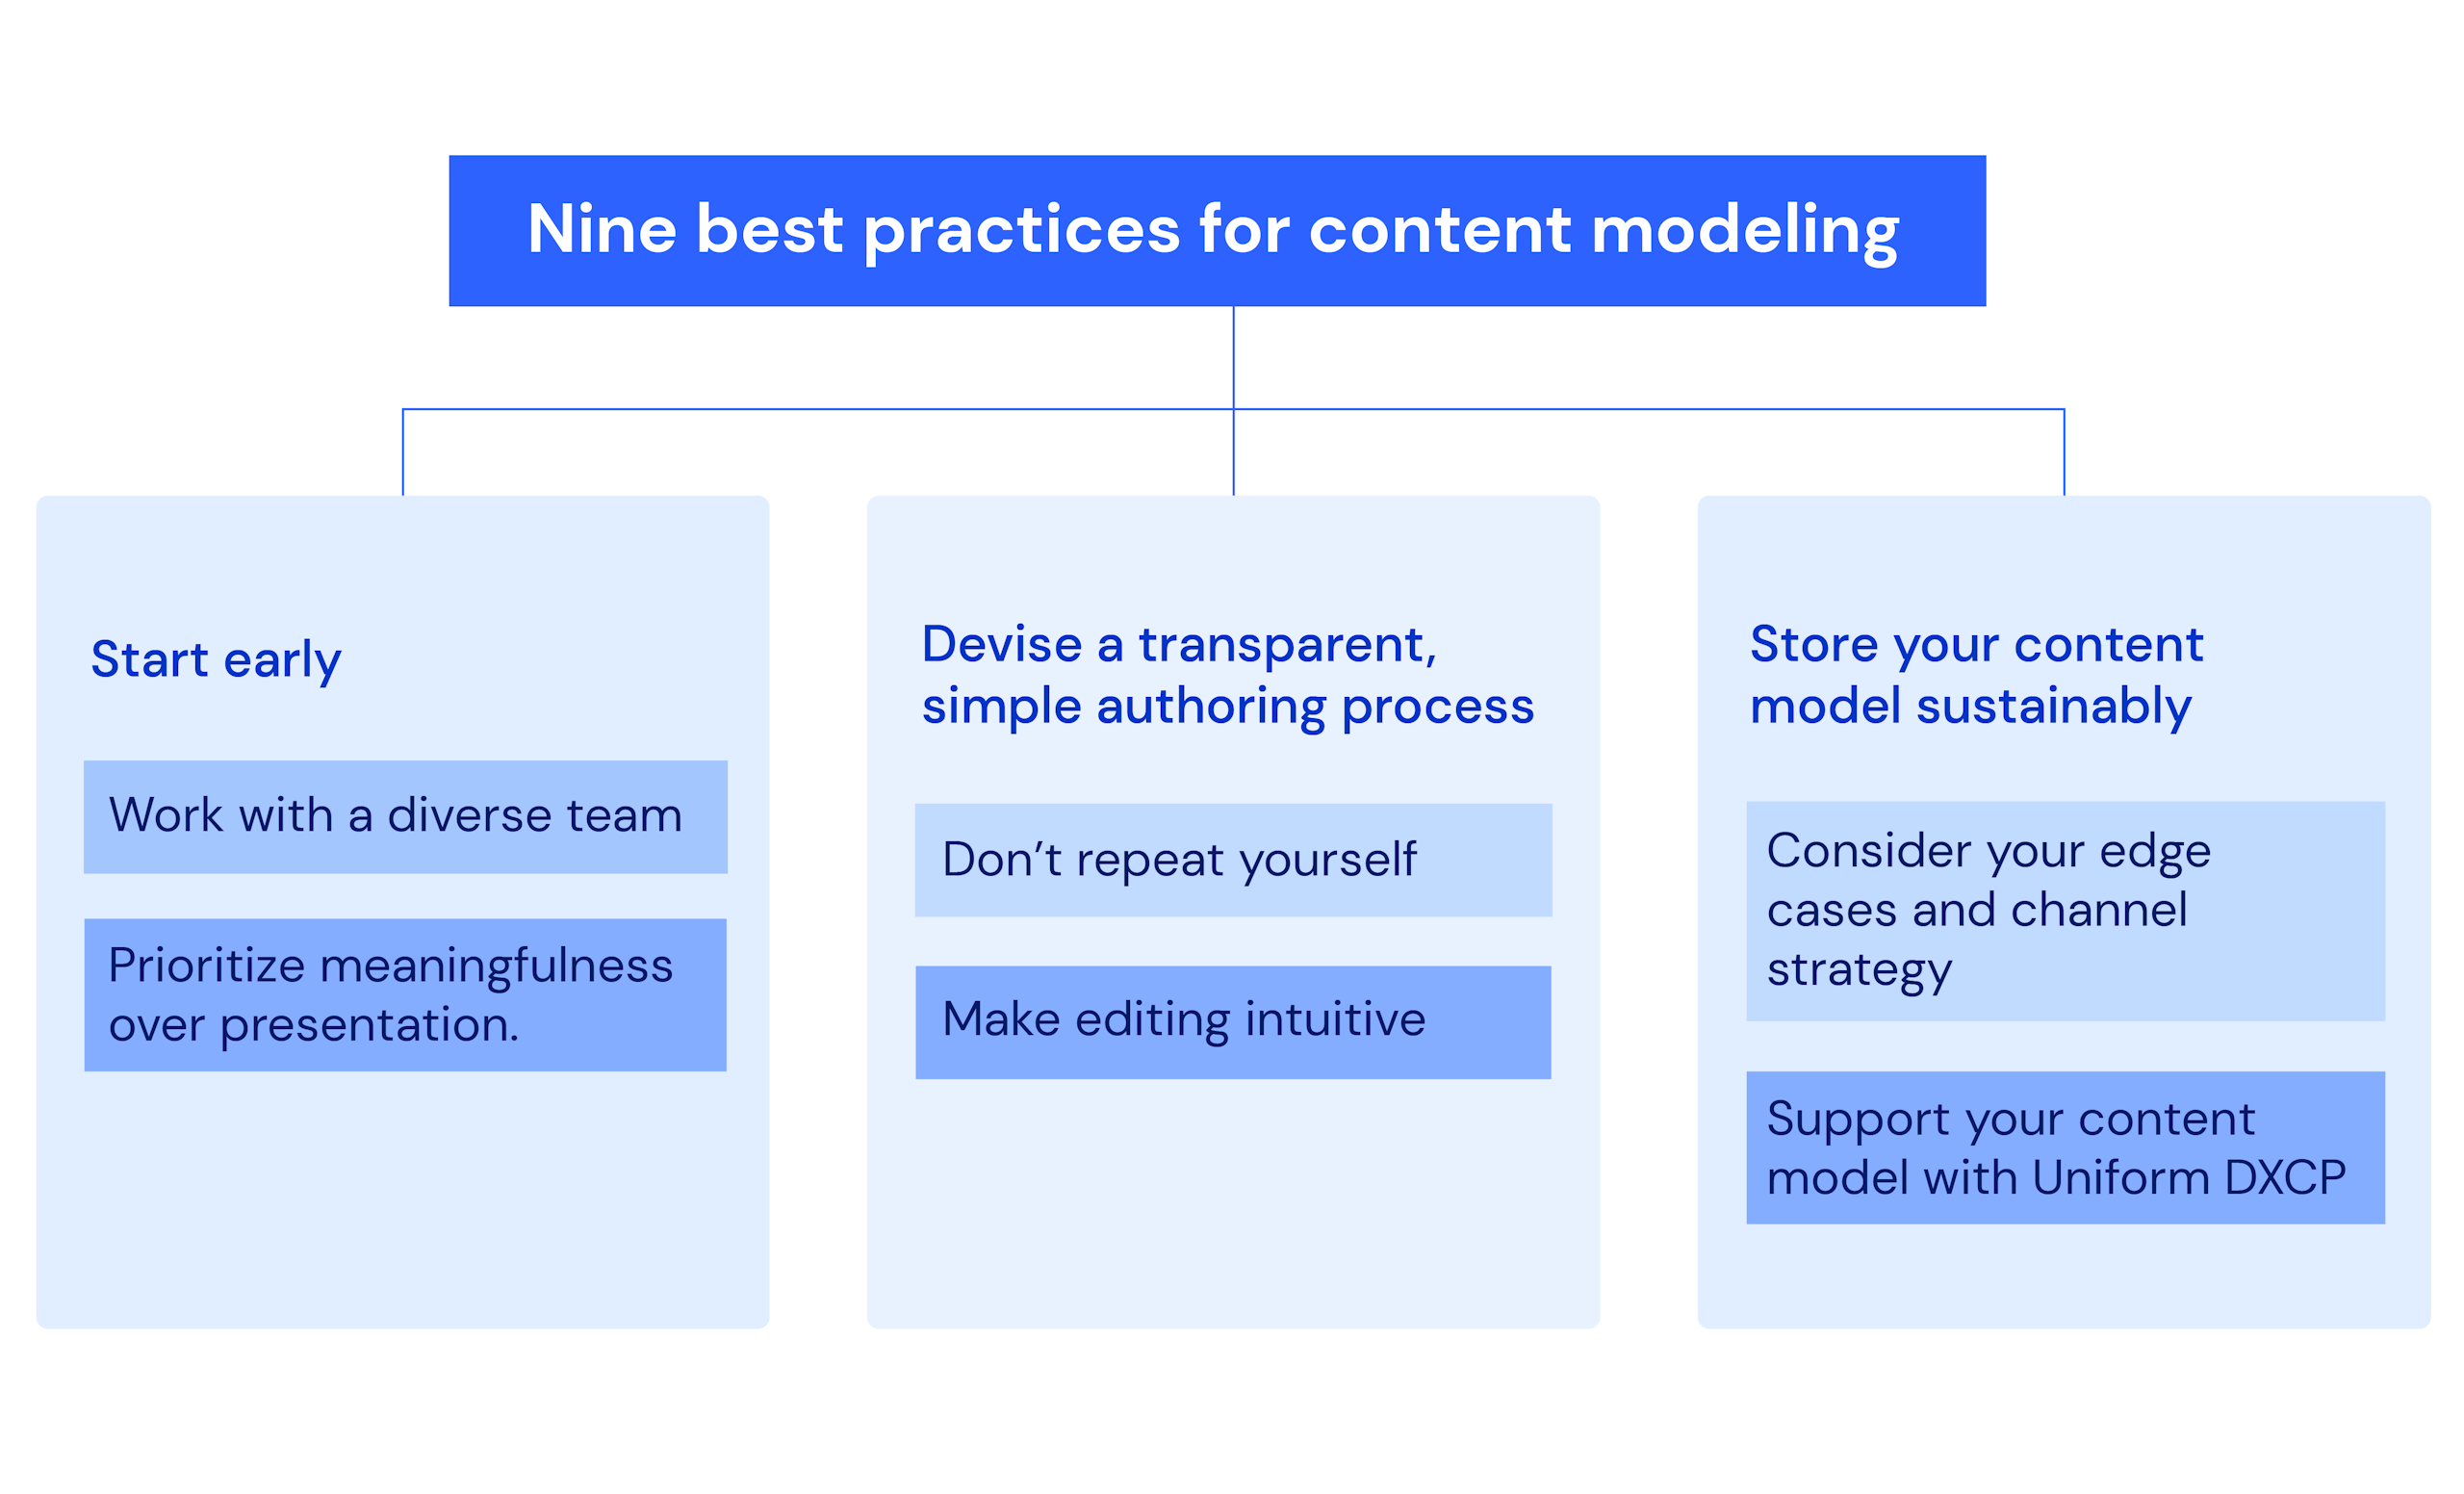 Nine practices for content modeling